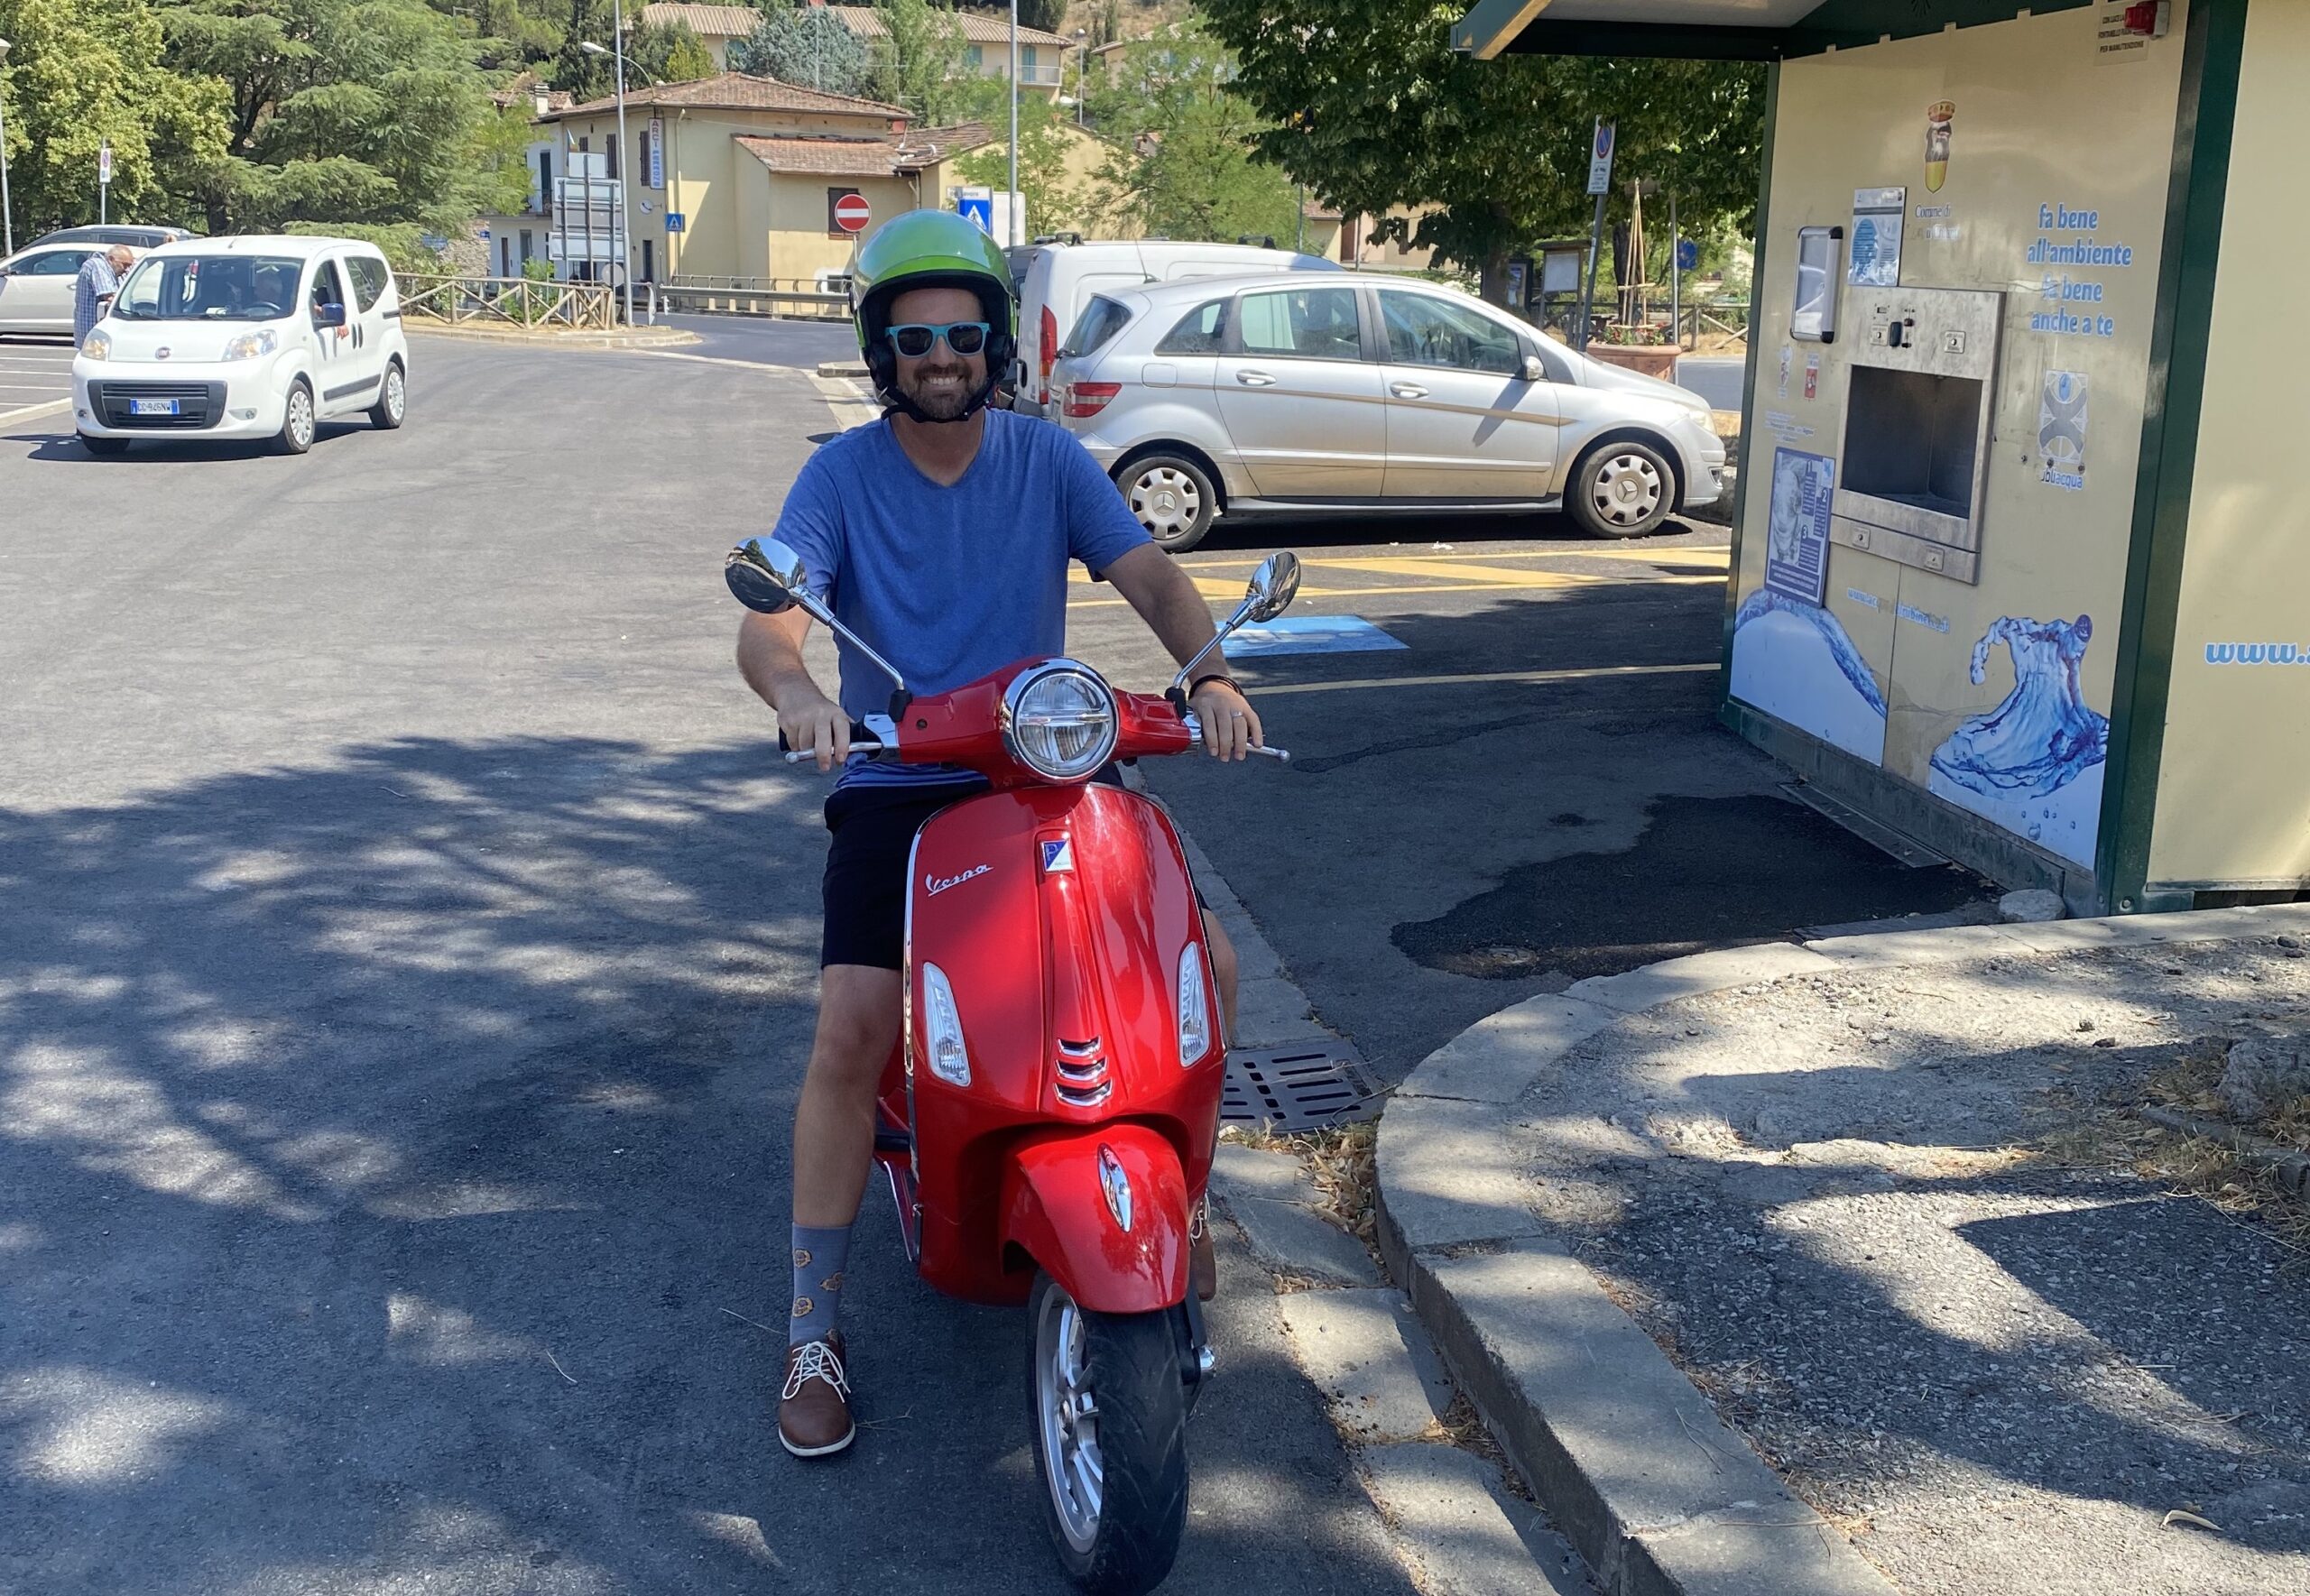 Who’s going to bring a fuel-cell scooter to California?